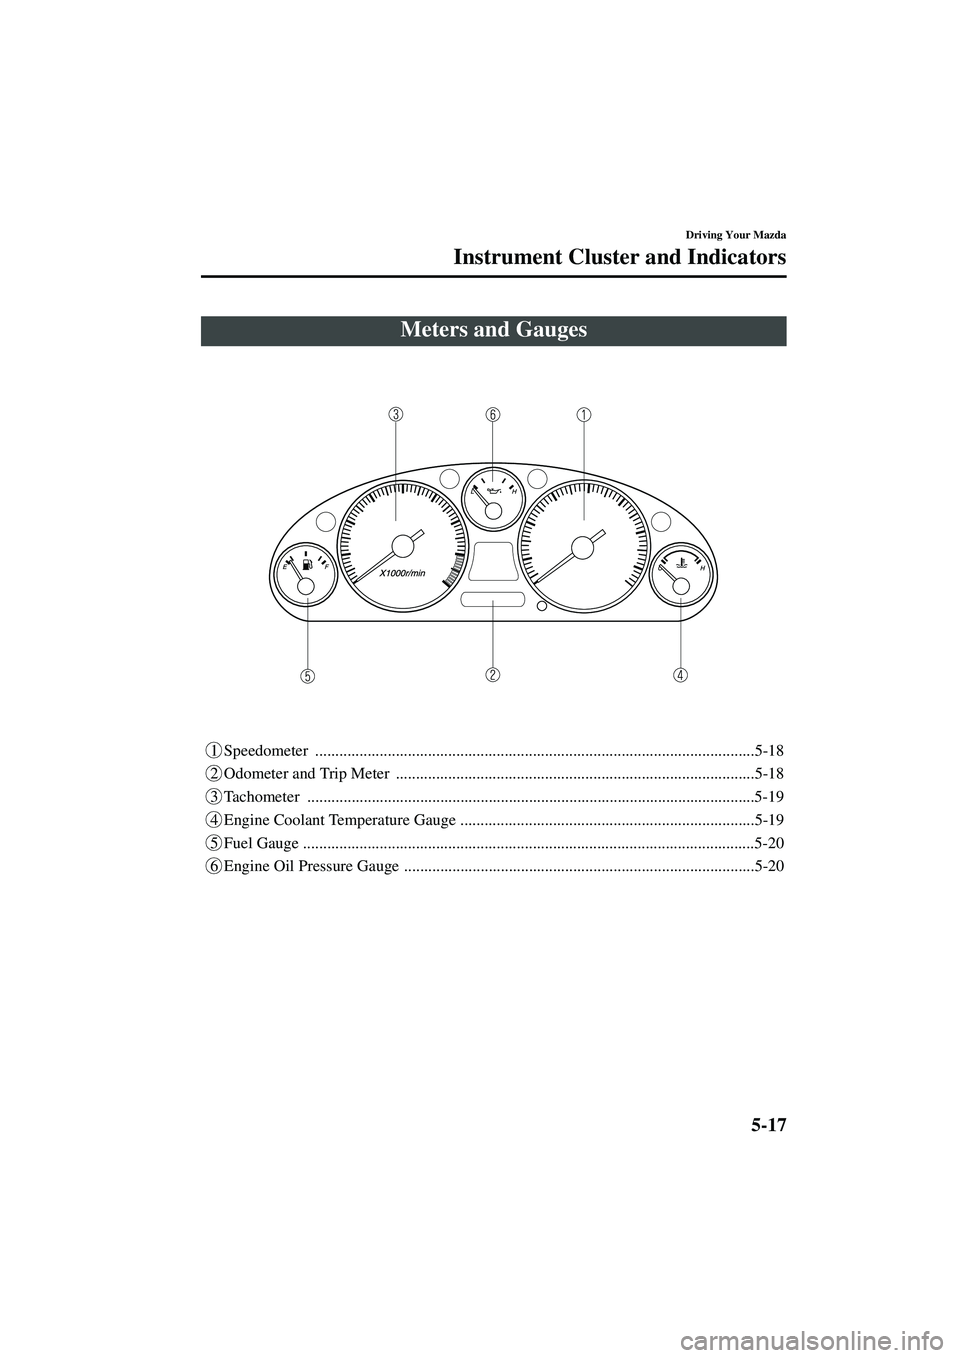 MAZDA MODEL MX-5 MIATA 2003  Owners Manual 5-17
Driving Your Mazda
Form No. 8R09-EA-02G
Instrument Cluster and Indicators
1 Speedometer ...........................................................................................................